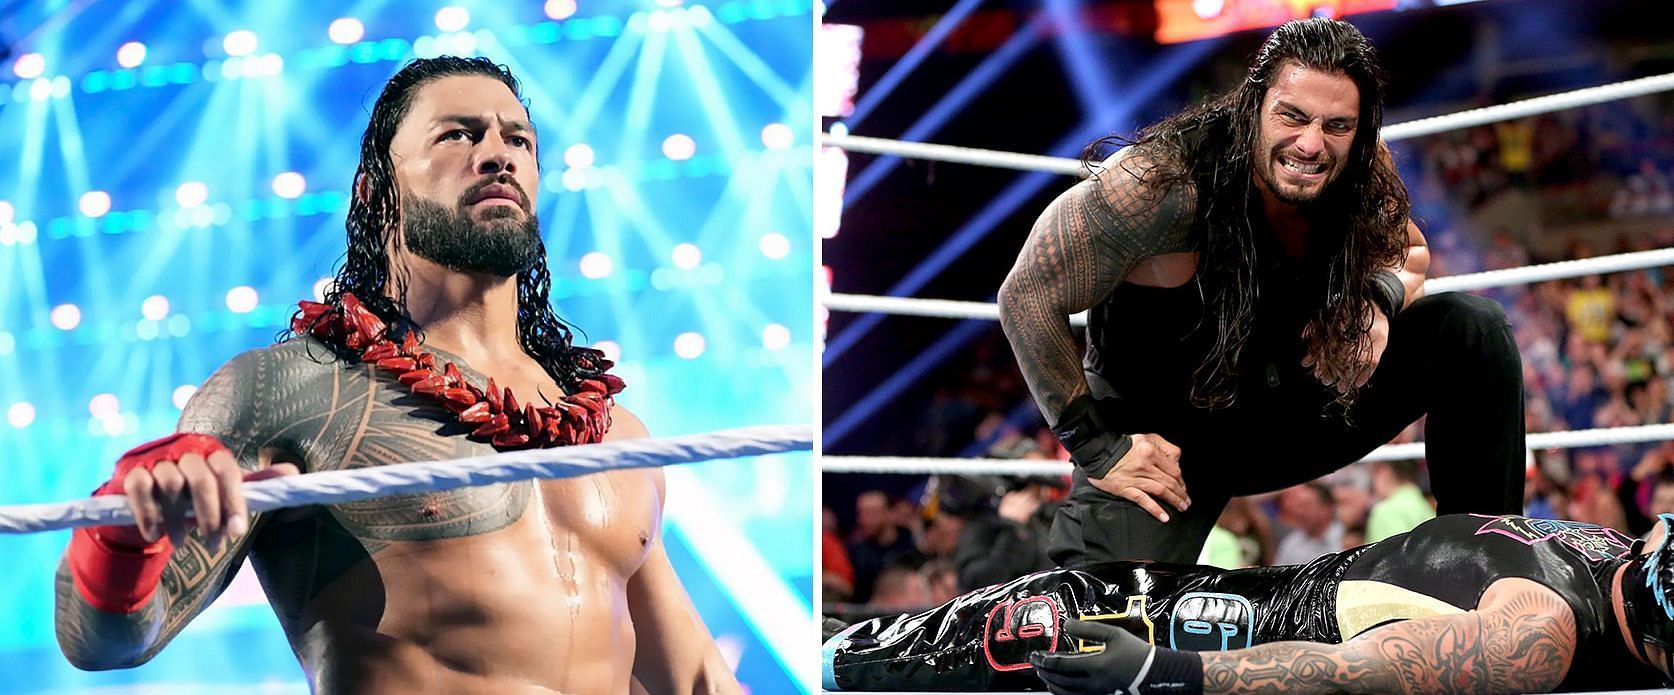 Will CM Punk return to WWE to face Roman Reigns?